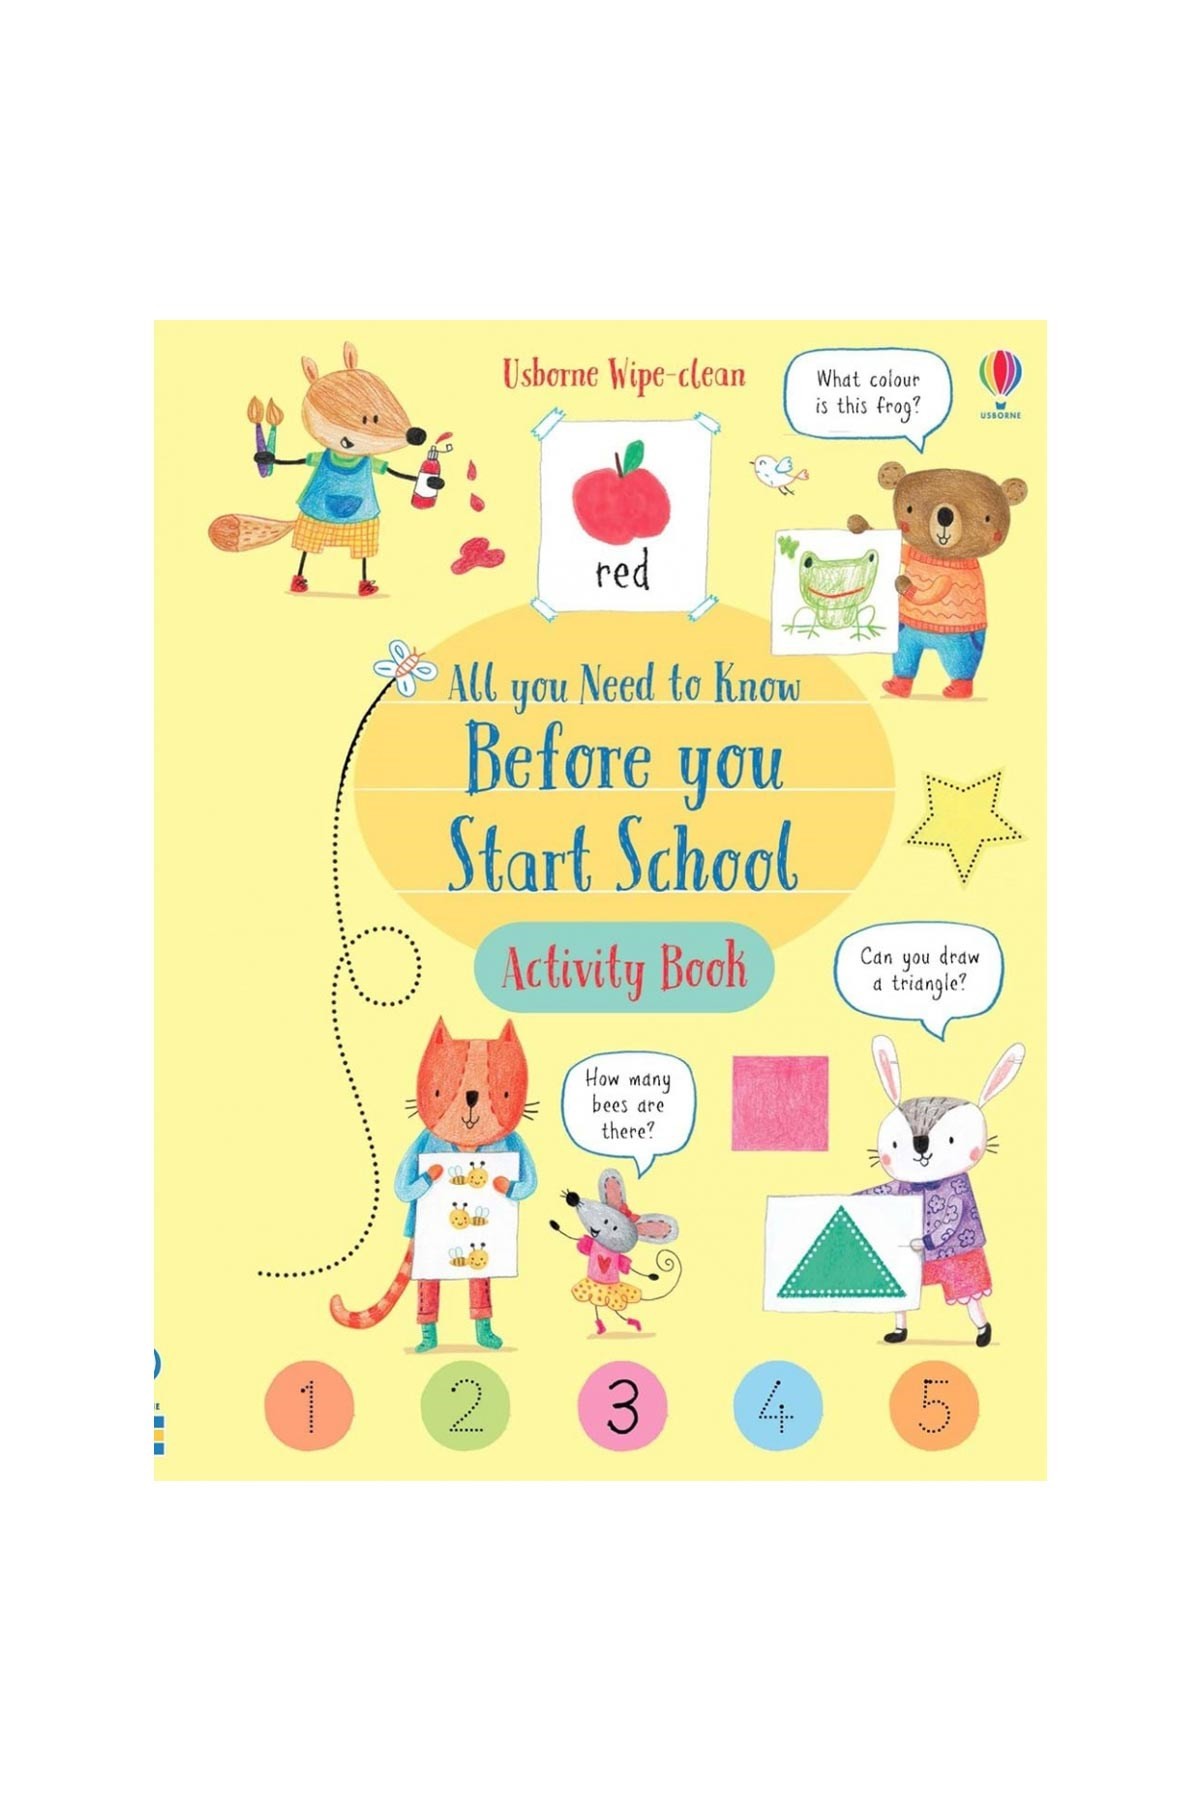 The Usborne Wipe-Clean All You Need to Know Before You Start School Activity Book